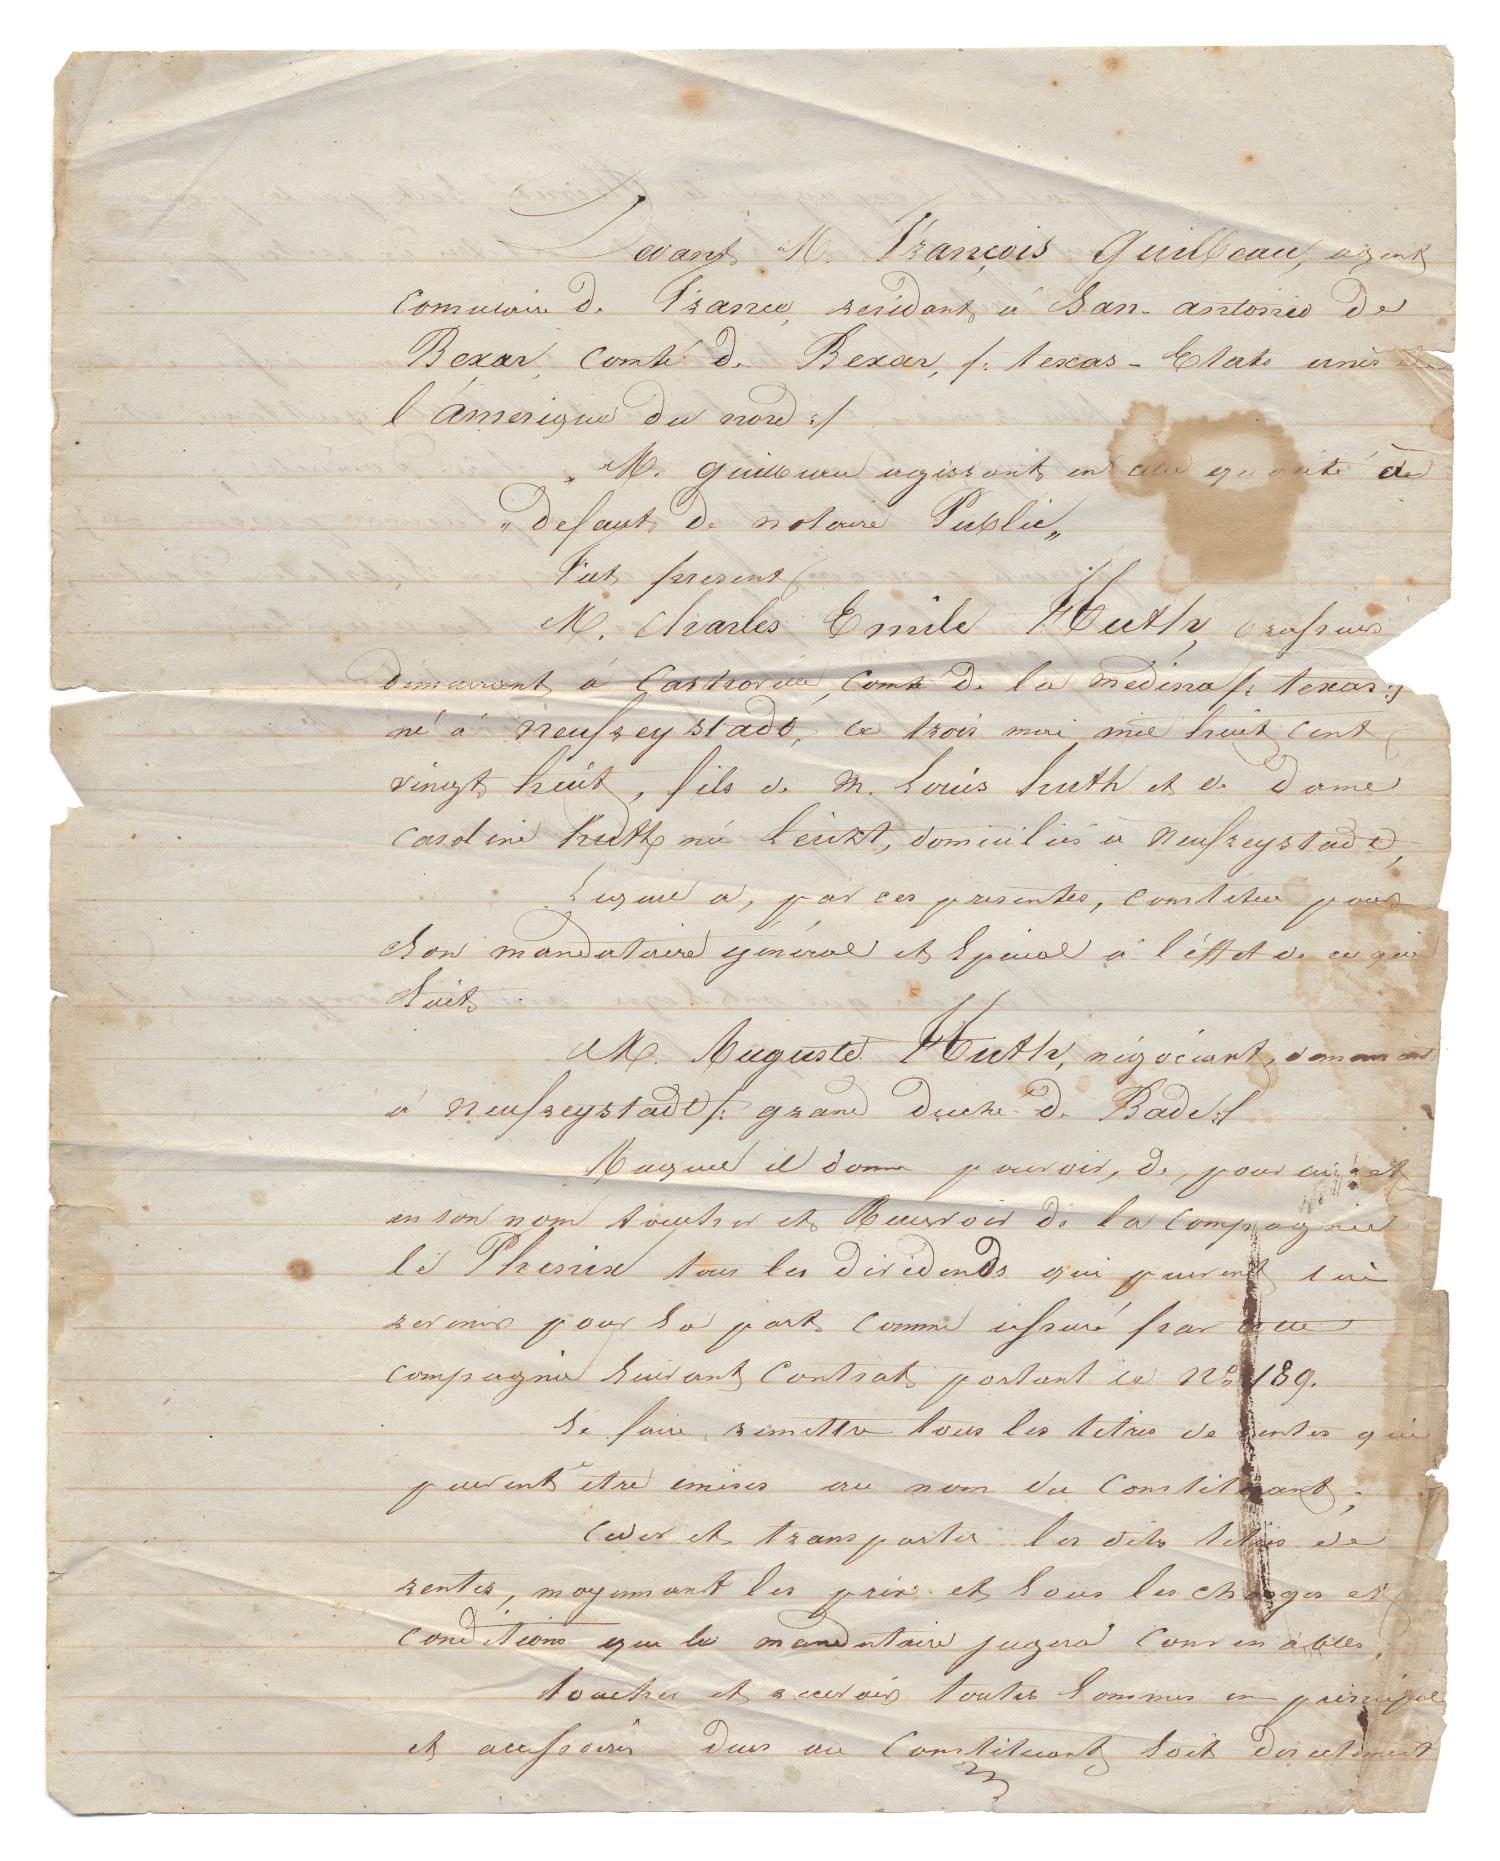 [Document granting Auguste Huth power of attorney for Charles Emile Huth]
                                                
                                                    [Sequence #]: 1 of 2
                                                